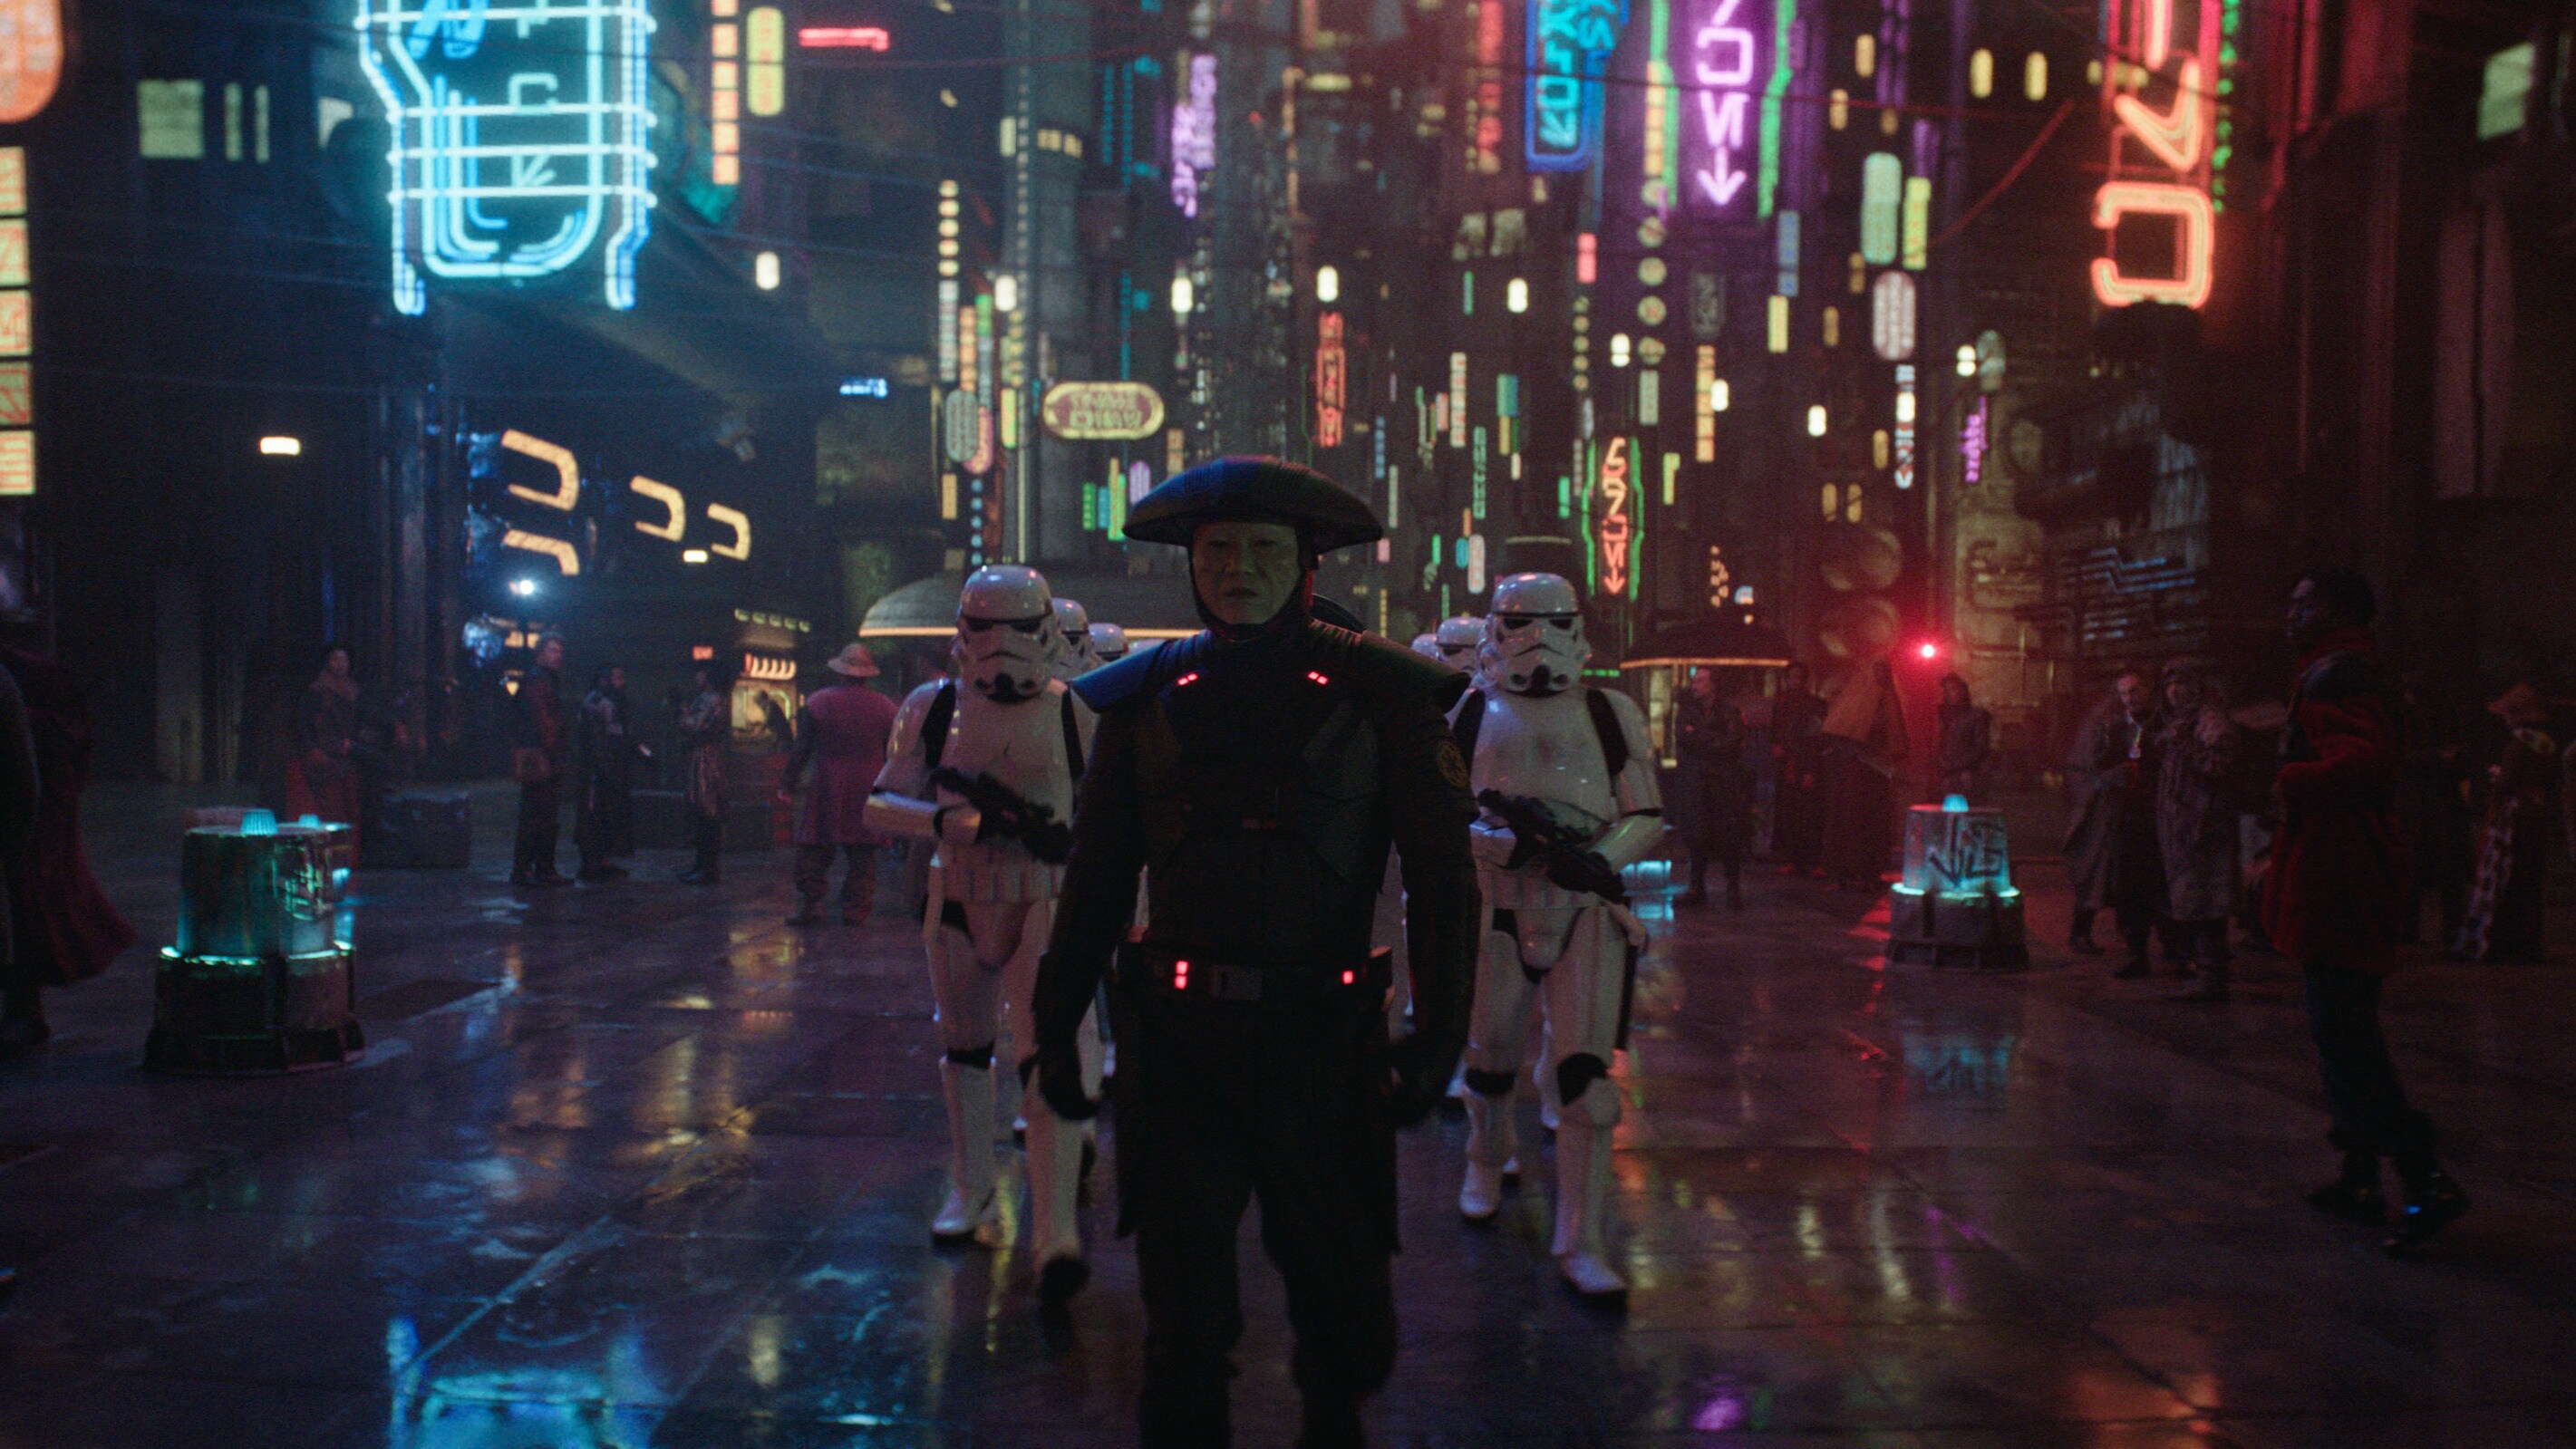 Fifth Brother (Sung Kang) and Stormtroopers in Lucasfilm's OBI-WAN KENOBI, exclusively on Disney+. © 2022 Lucasfilm Ltd. & ™. All Rights Reserved.